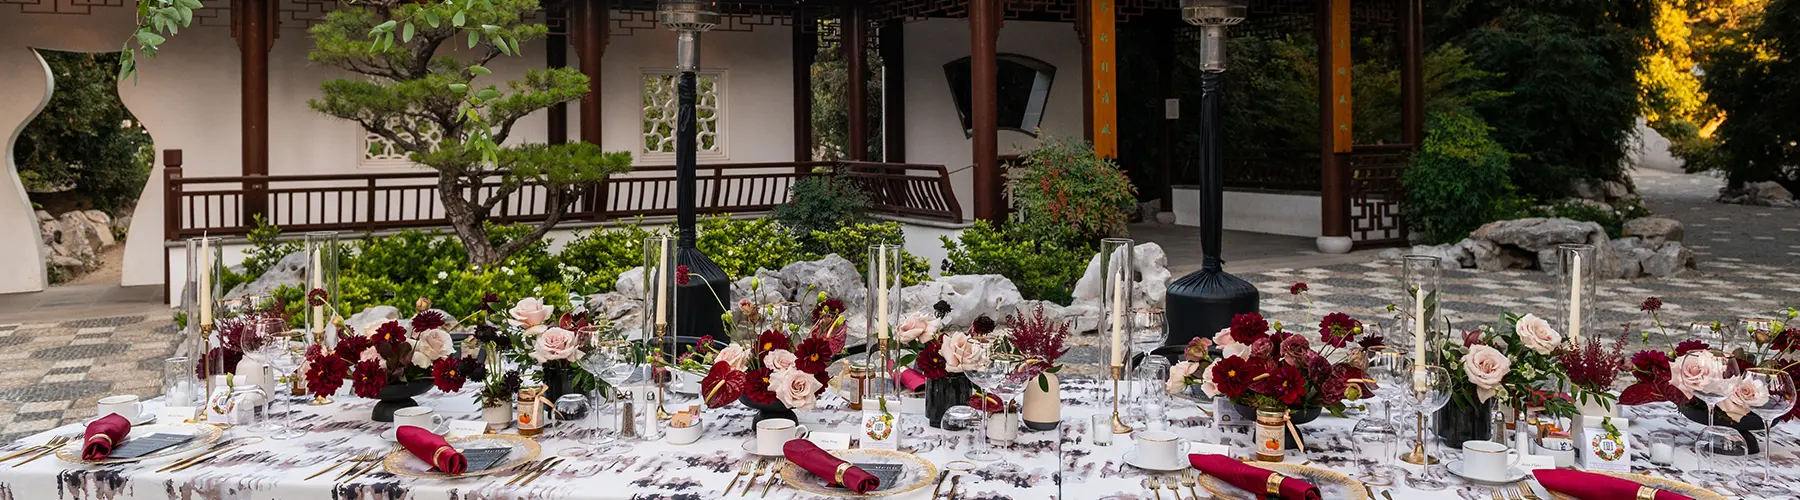 A dining table with place settings of red and light pink set up in an outdoor courtyard.